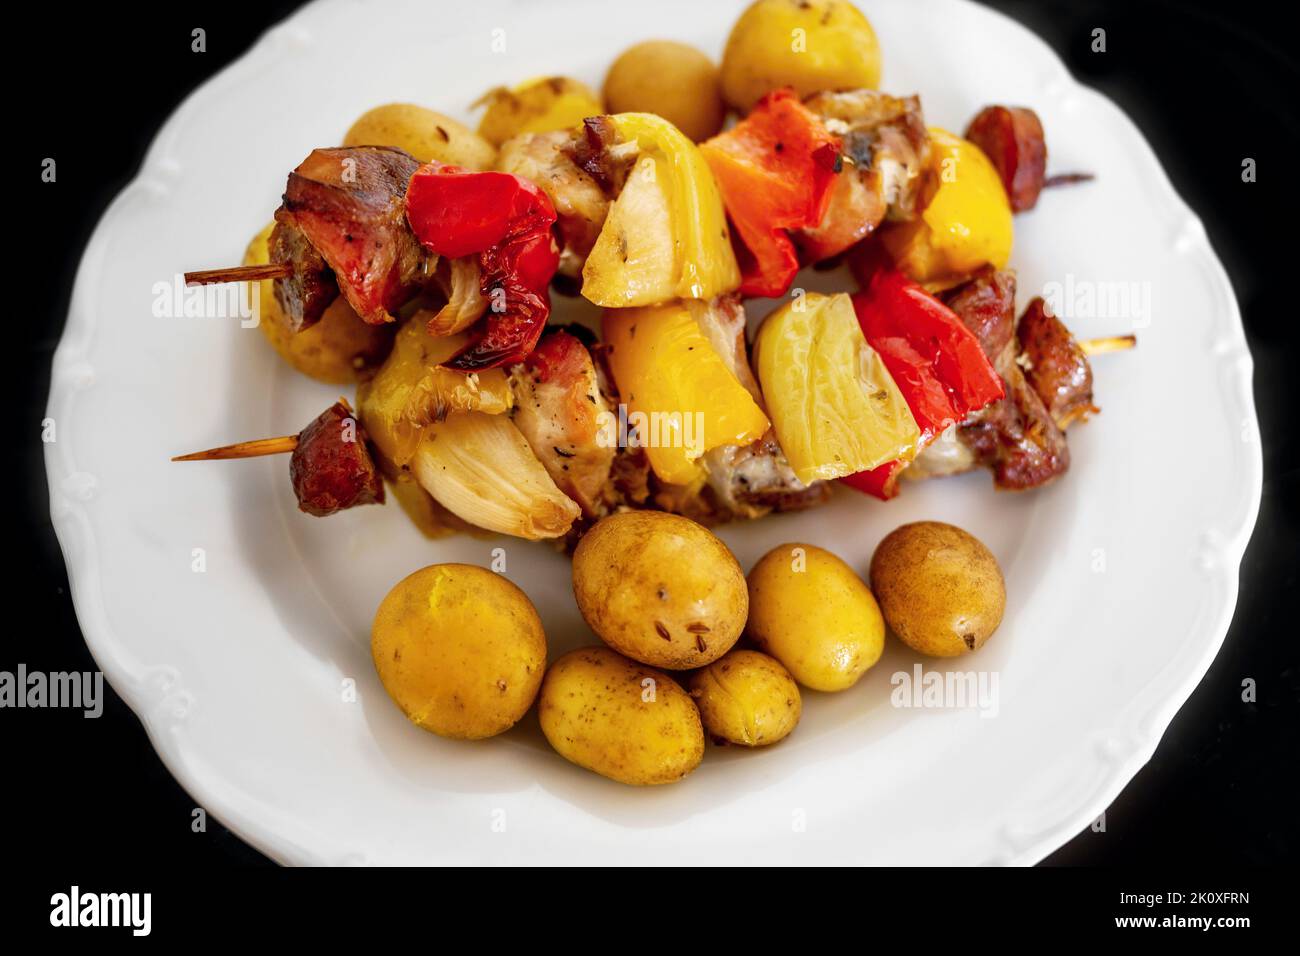 Skewer with pieces of pork meat, red paprika, sausage, bacon and onion and boiled potato in skin on white plate, black background, closeup. Stock Photo